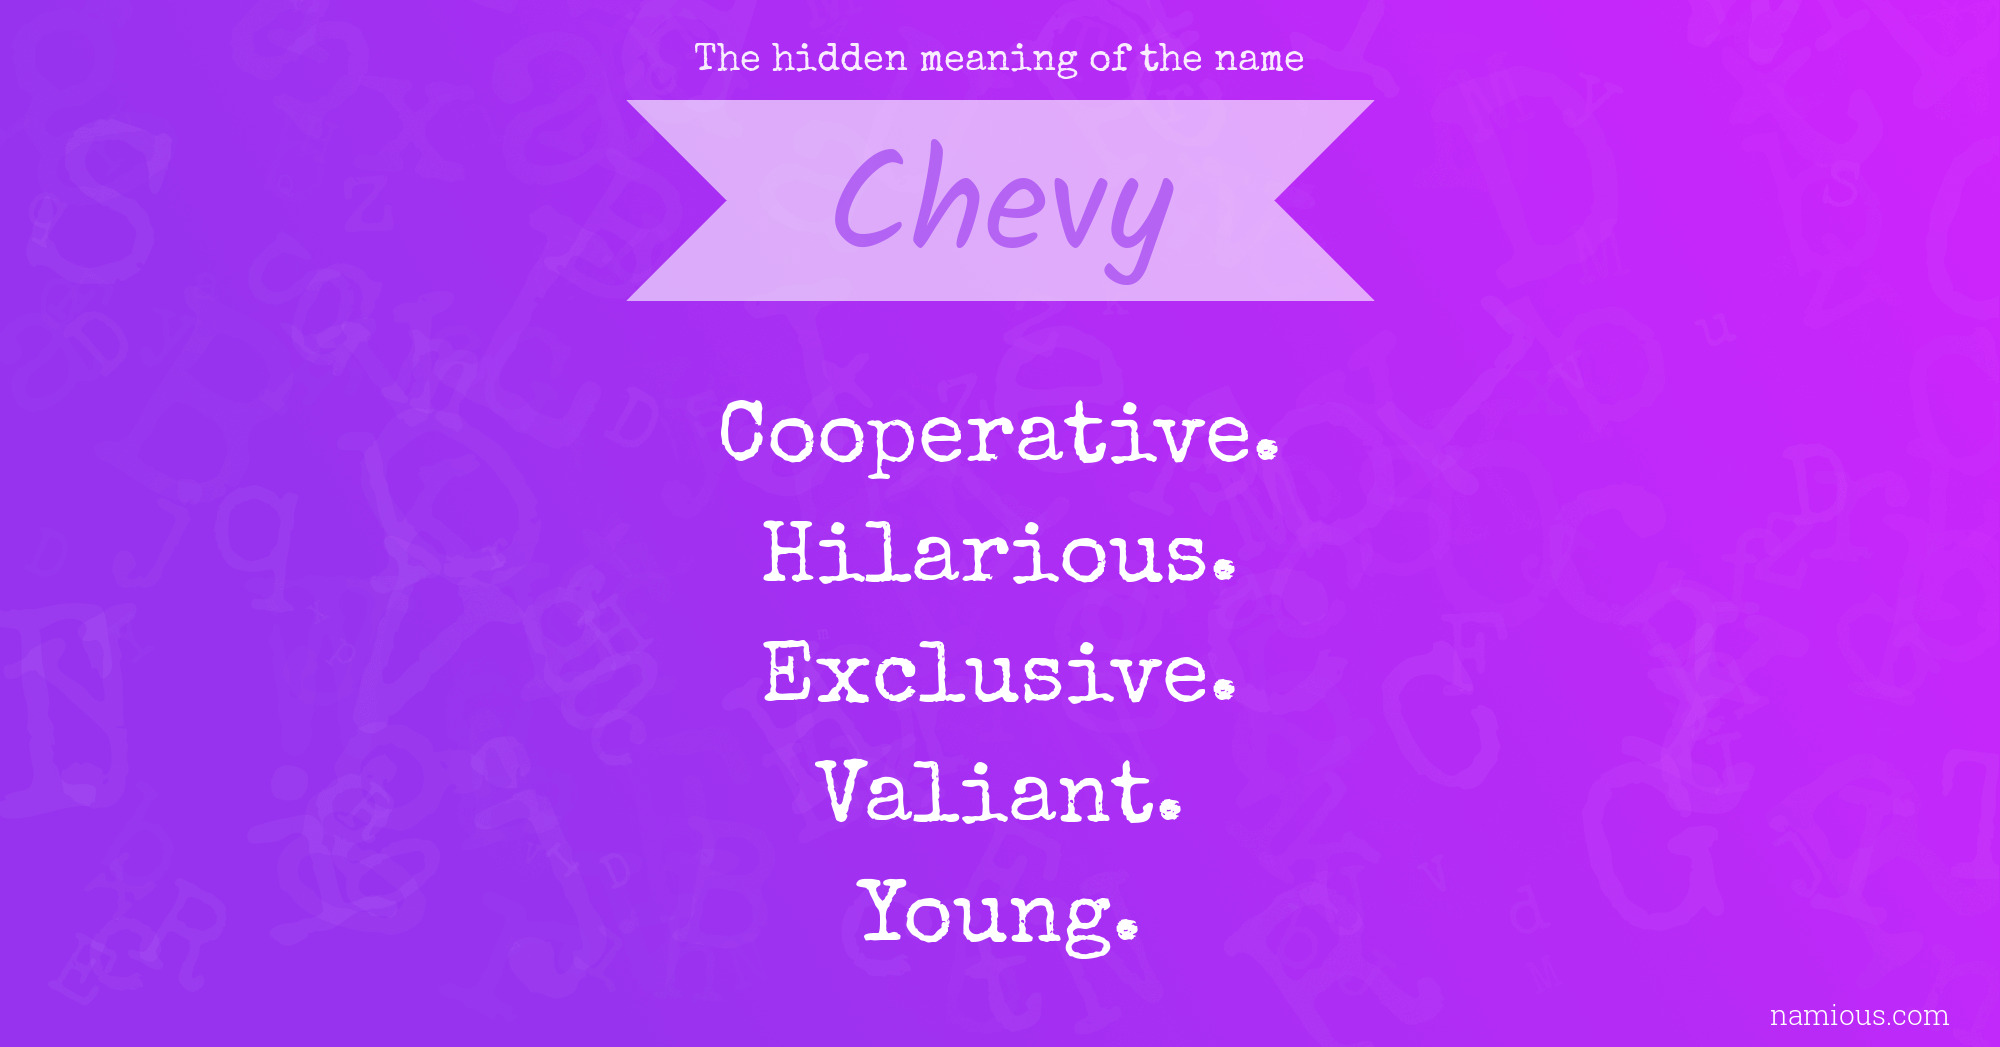 The hidden meaning of the name Chevy